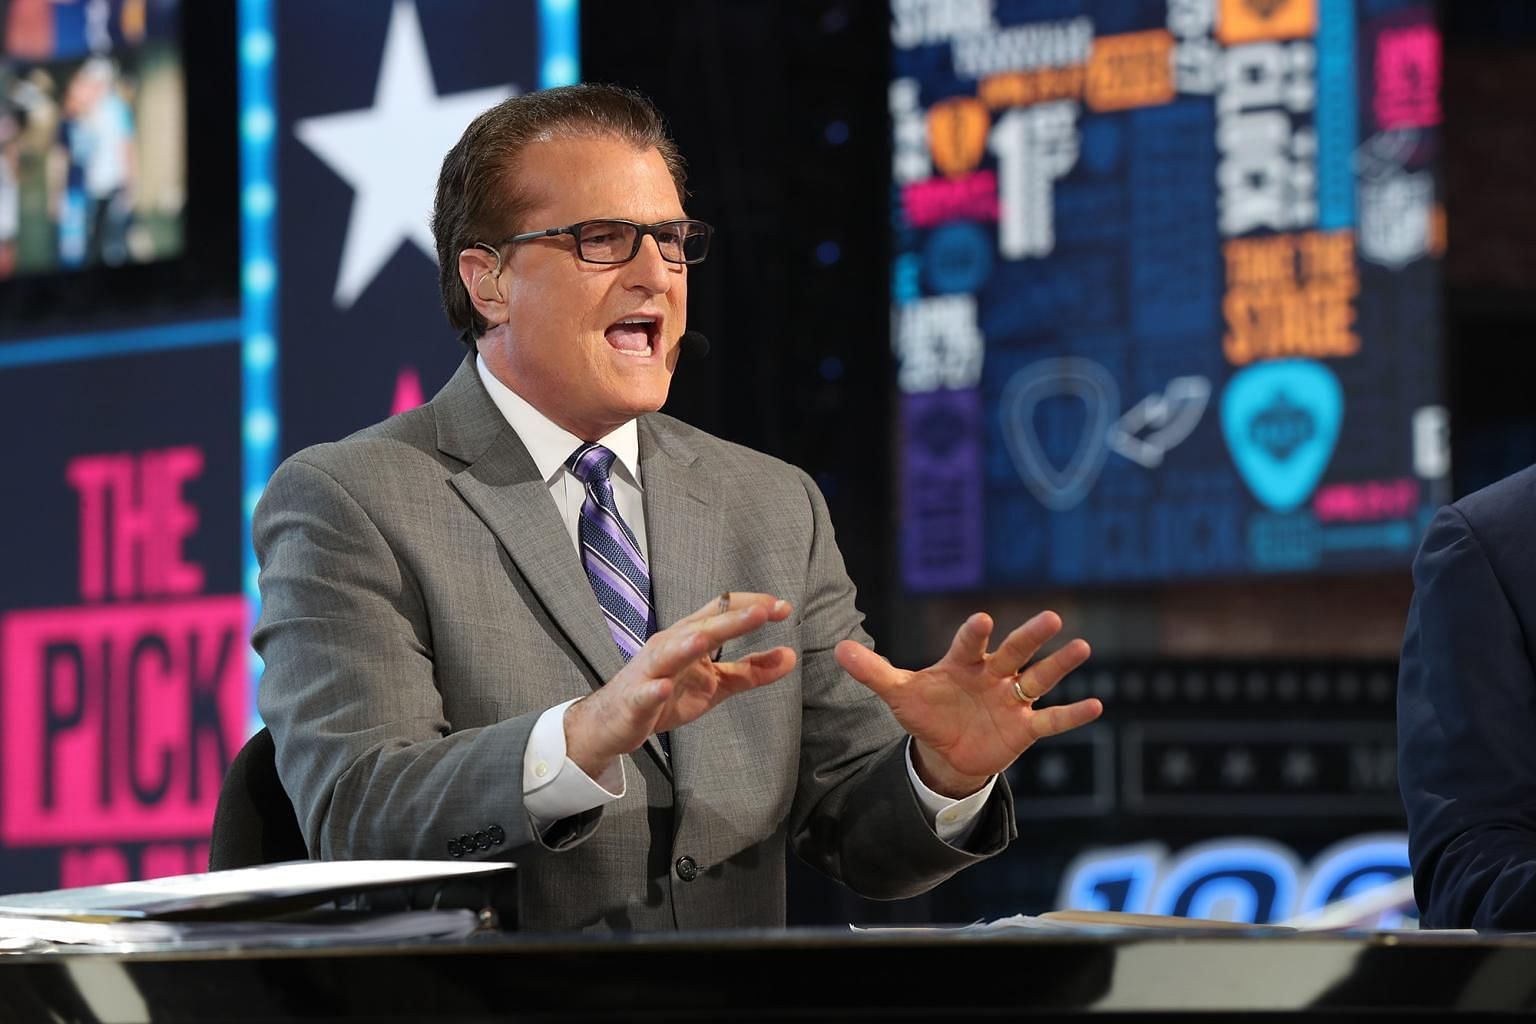 Mel Kiper has had some changes to his mock draft